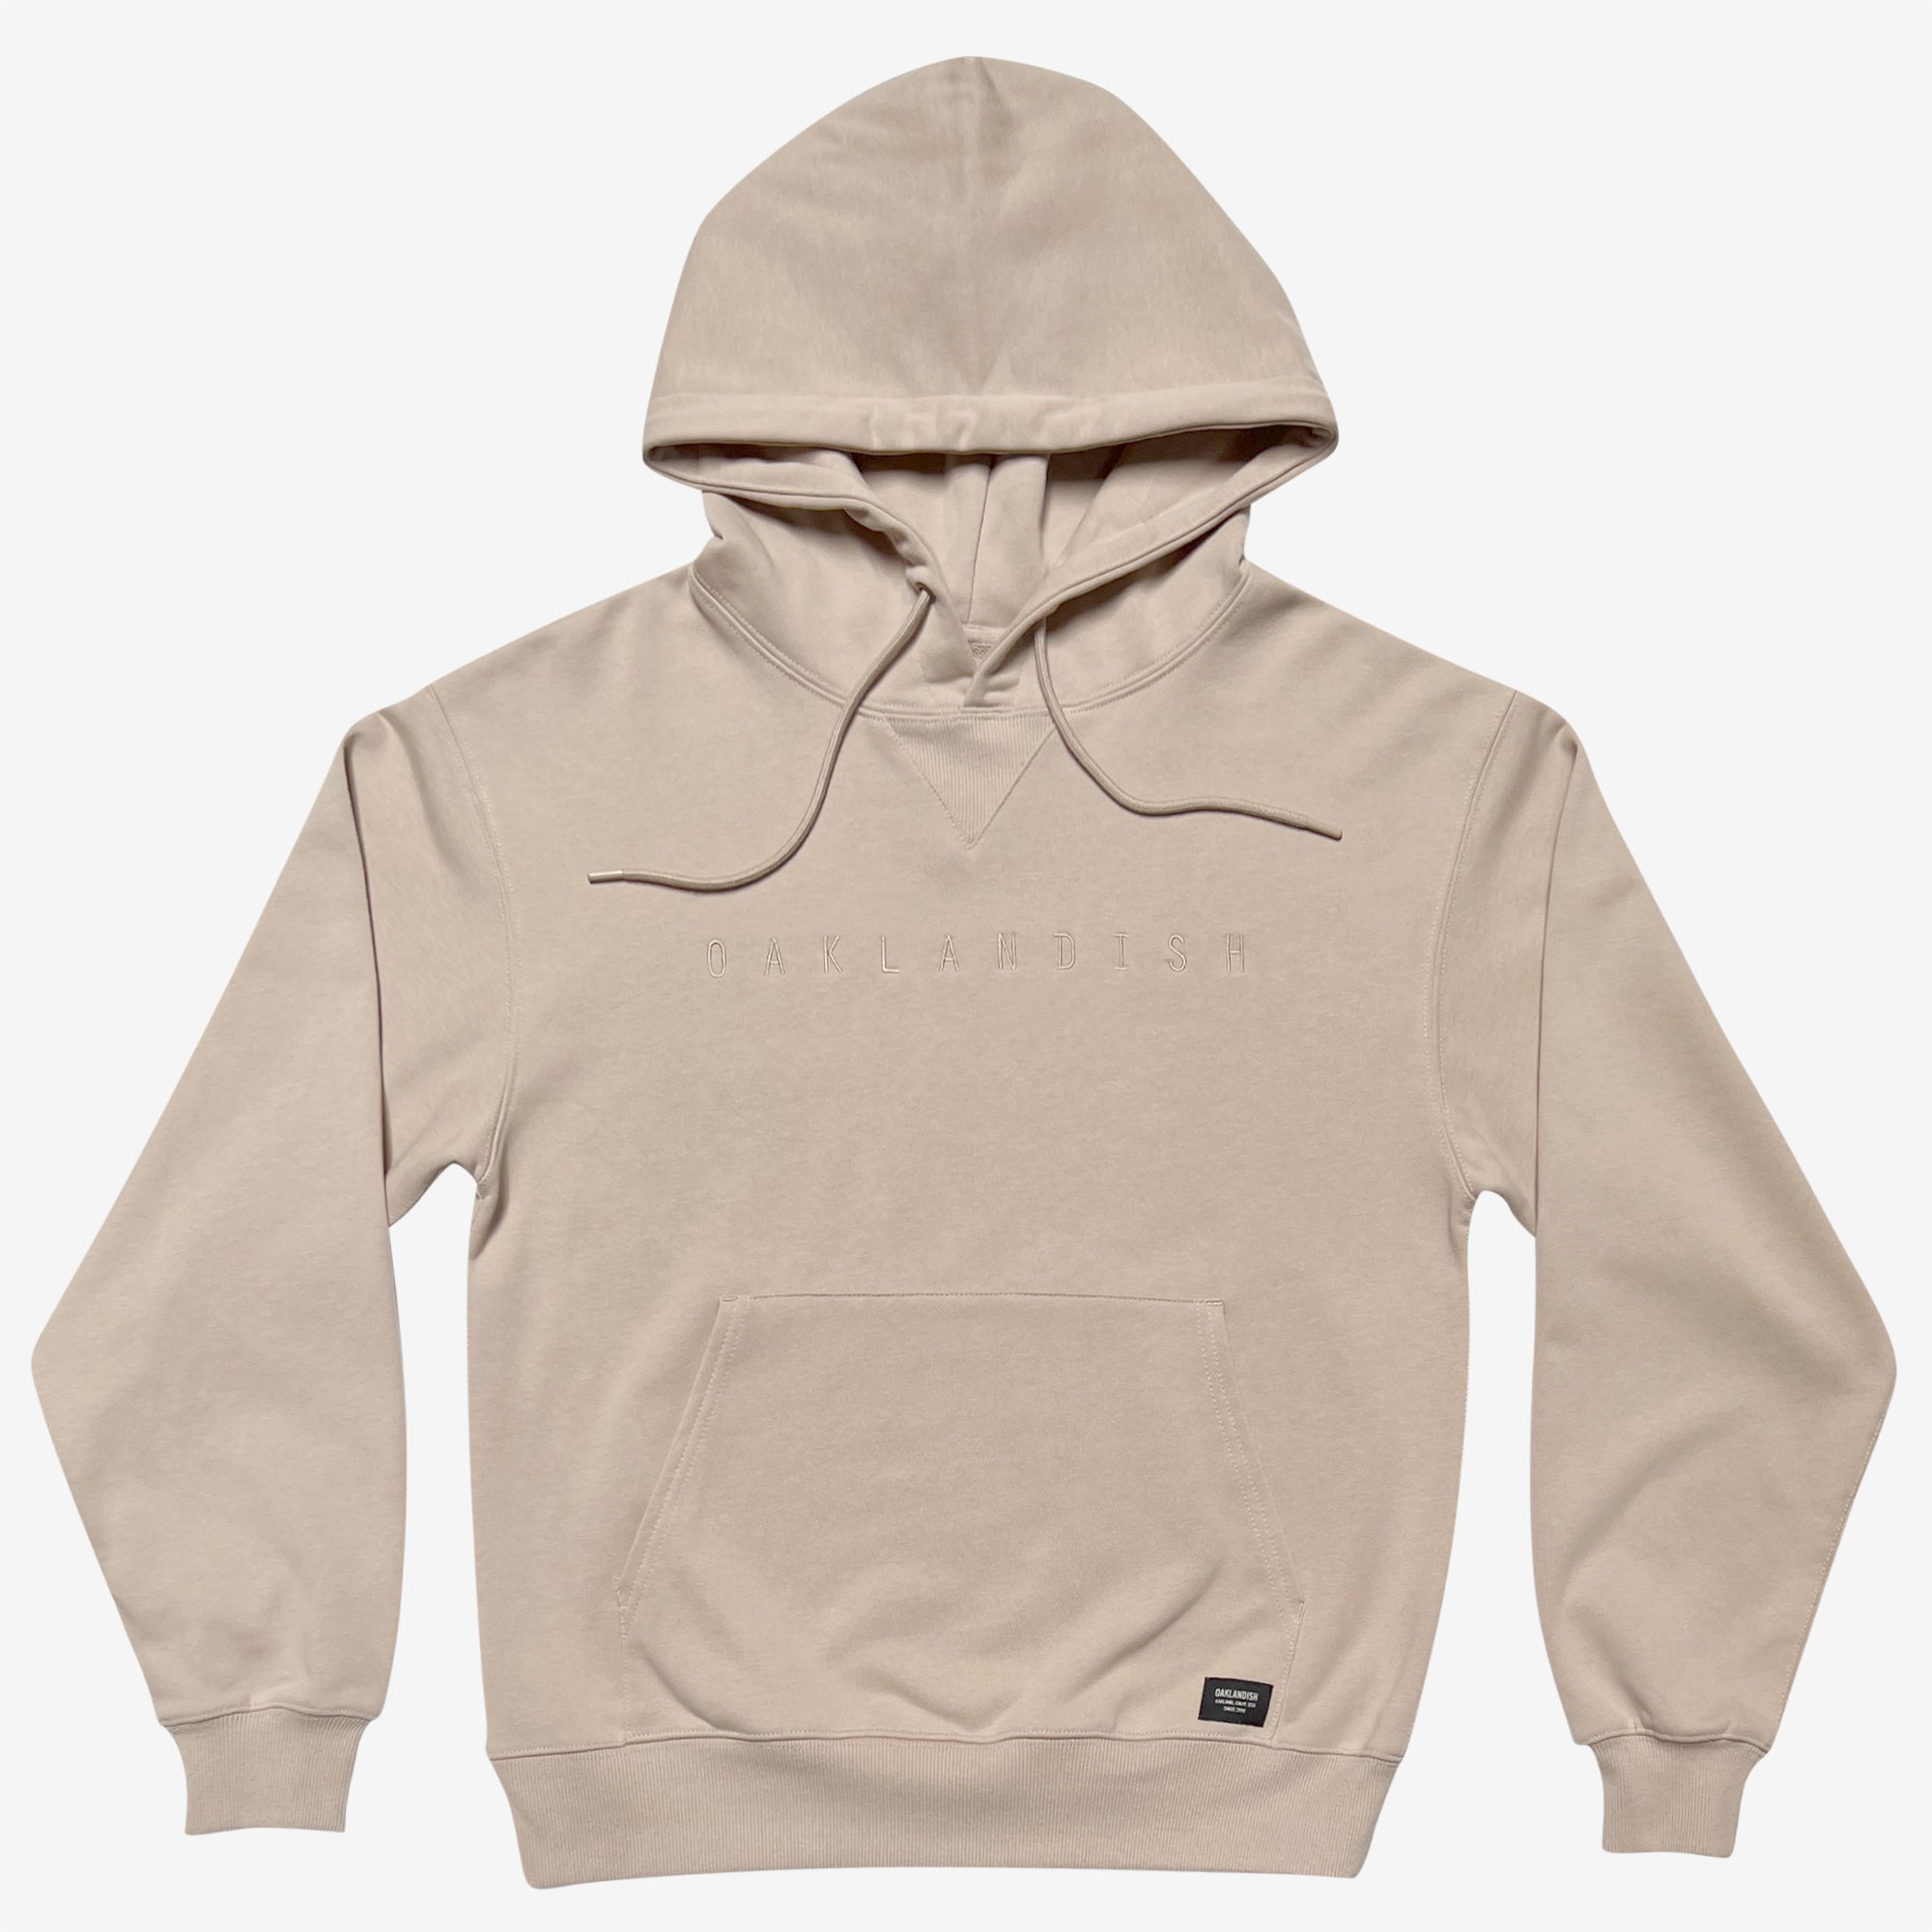 Sand-colored pullover hoodie with monochromatic Oaklandish wordmark embroidered on the chest.